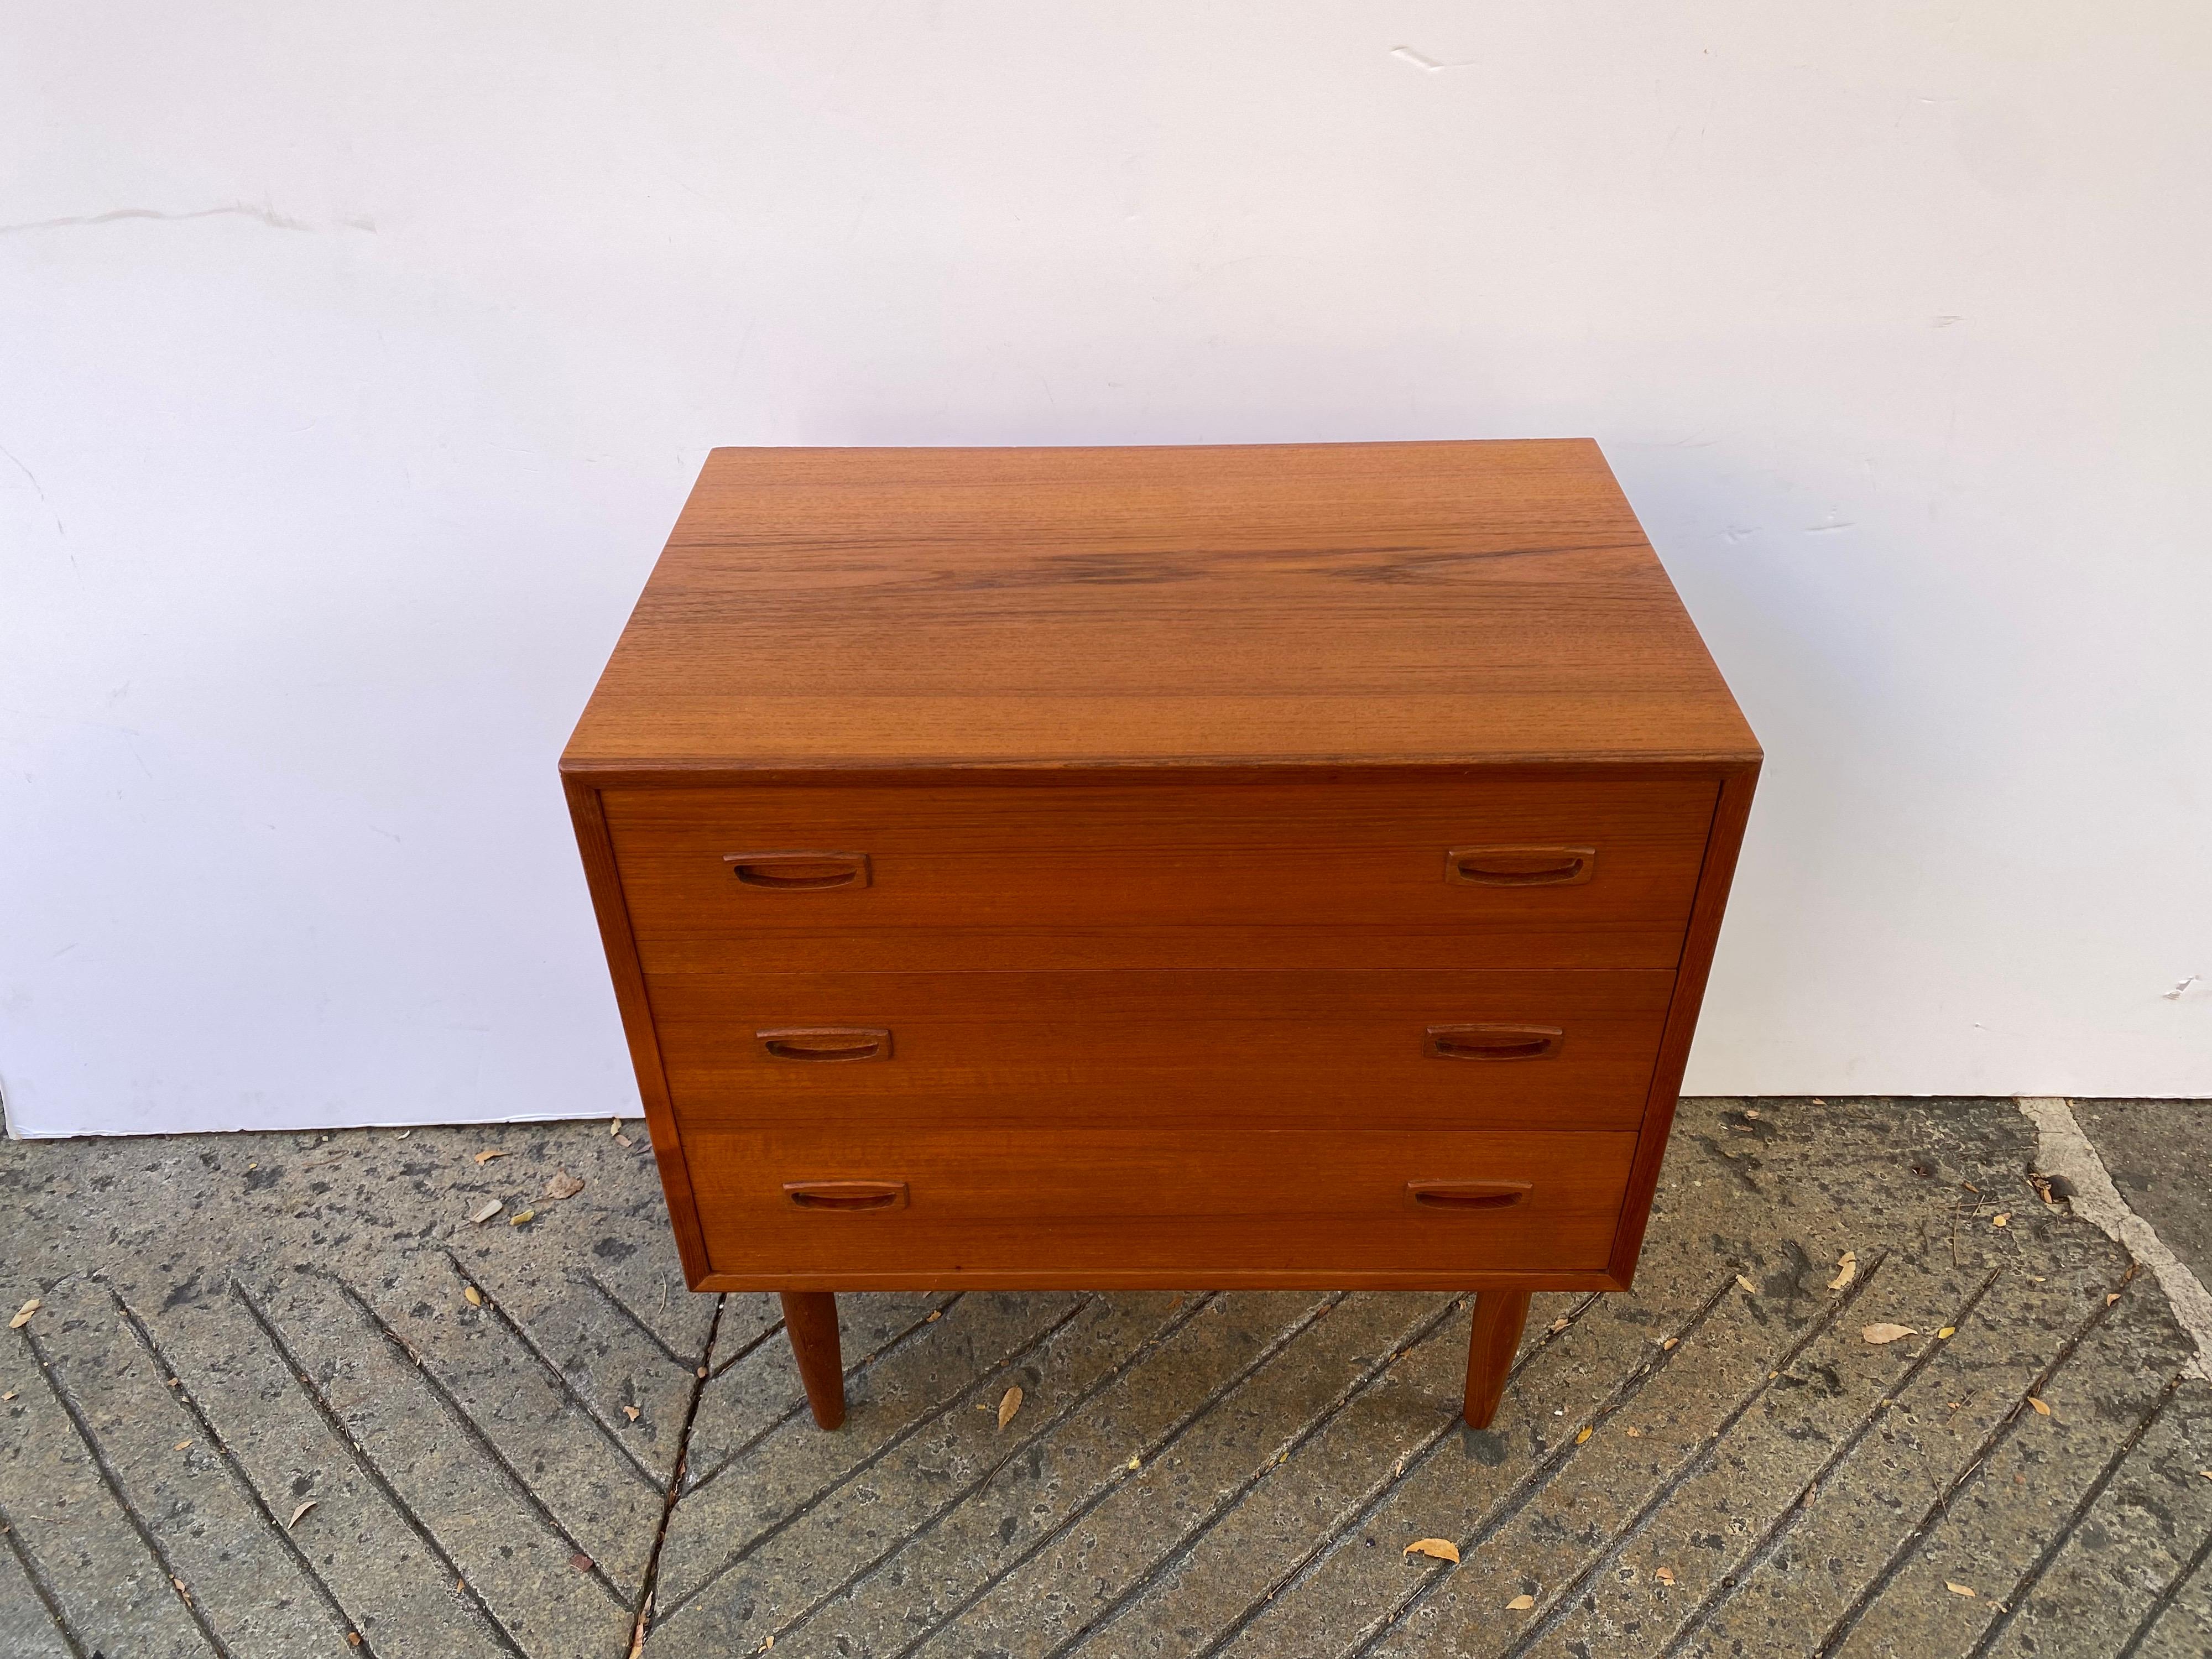 Teak Danish modern 3 drawer dresser with beautiful inset wood handles. Perfect to use as night tables as well! Great Scale and Size!

Size: 19